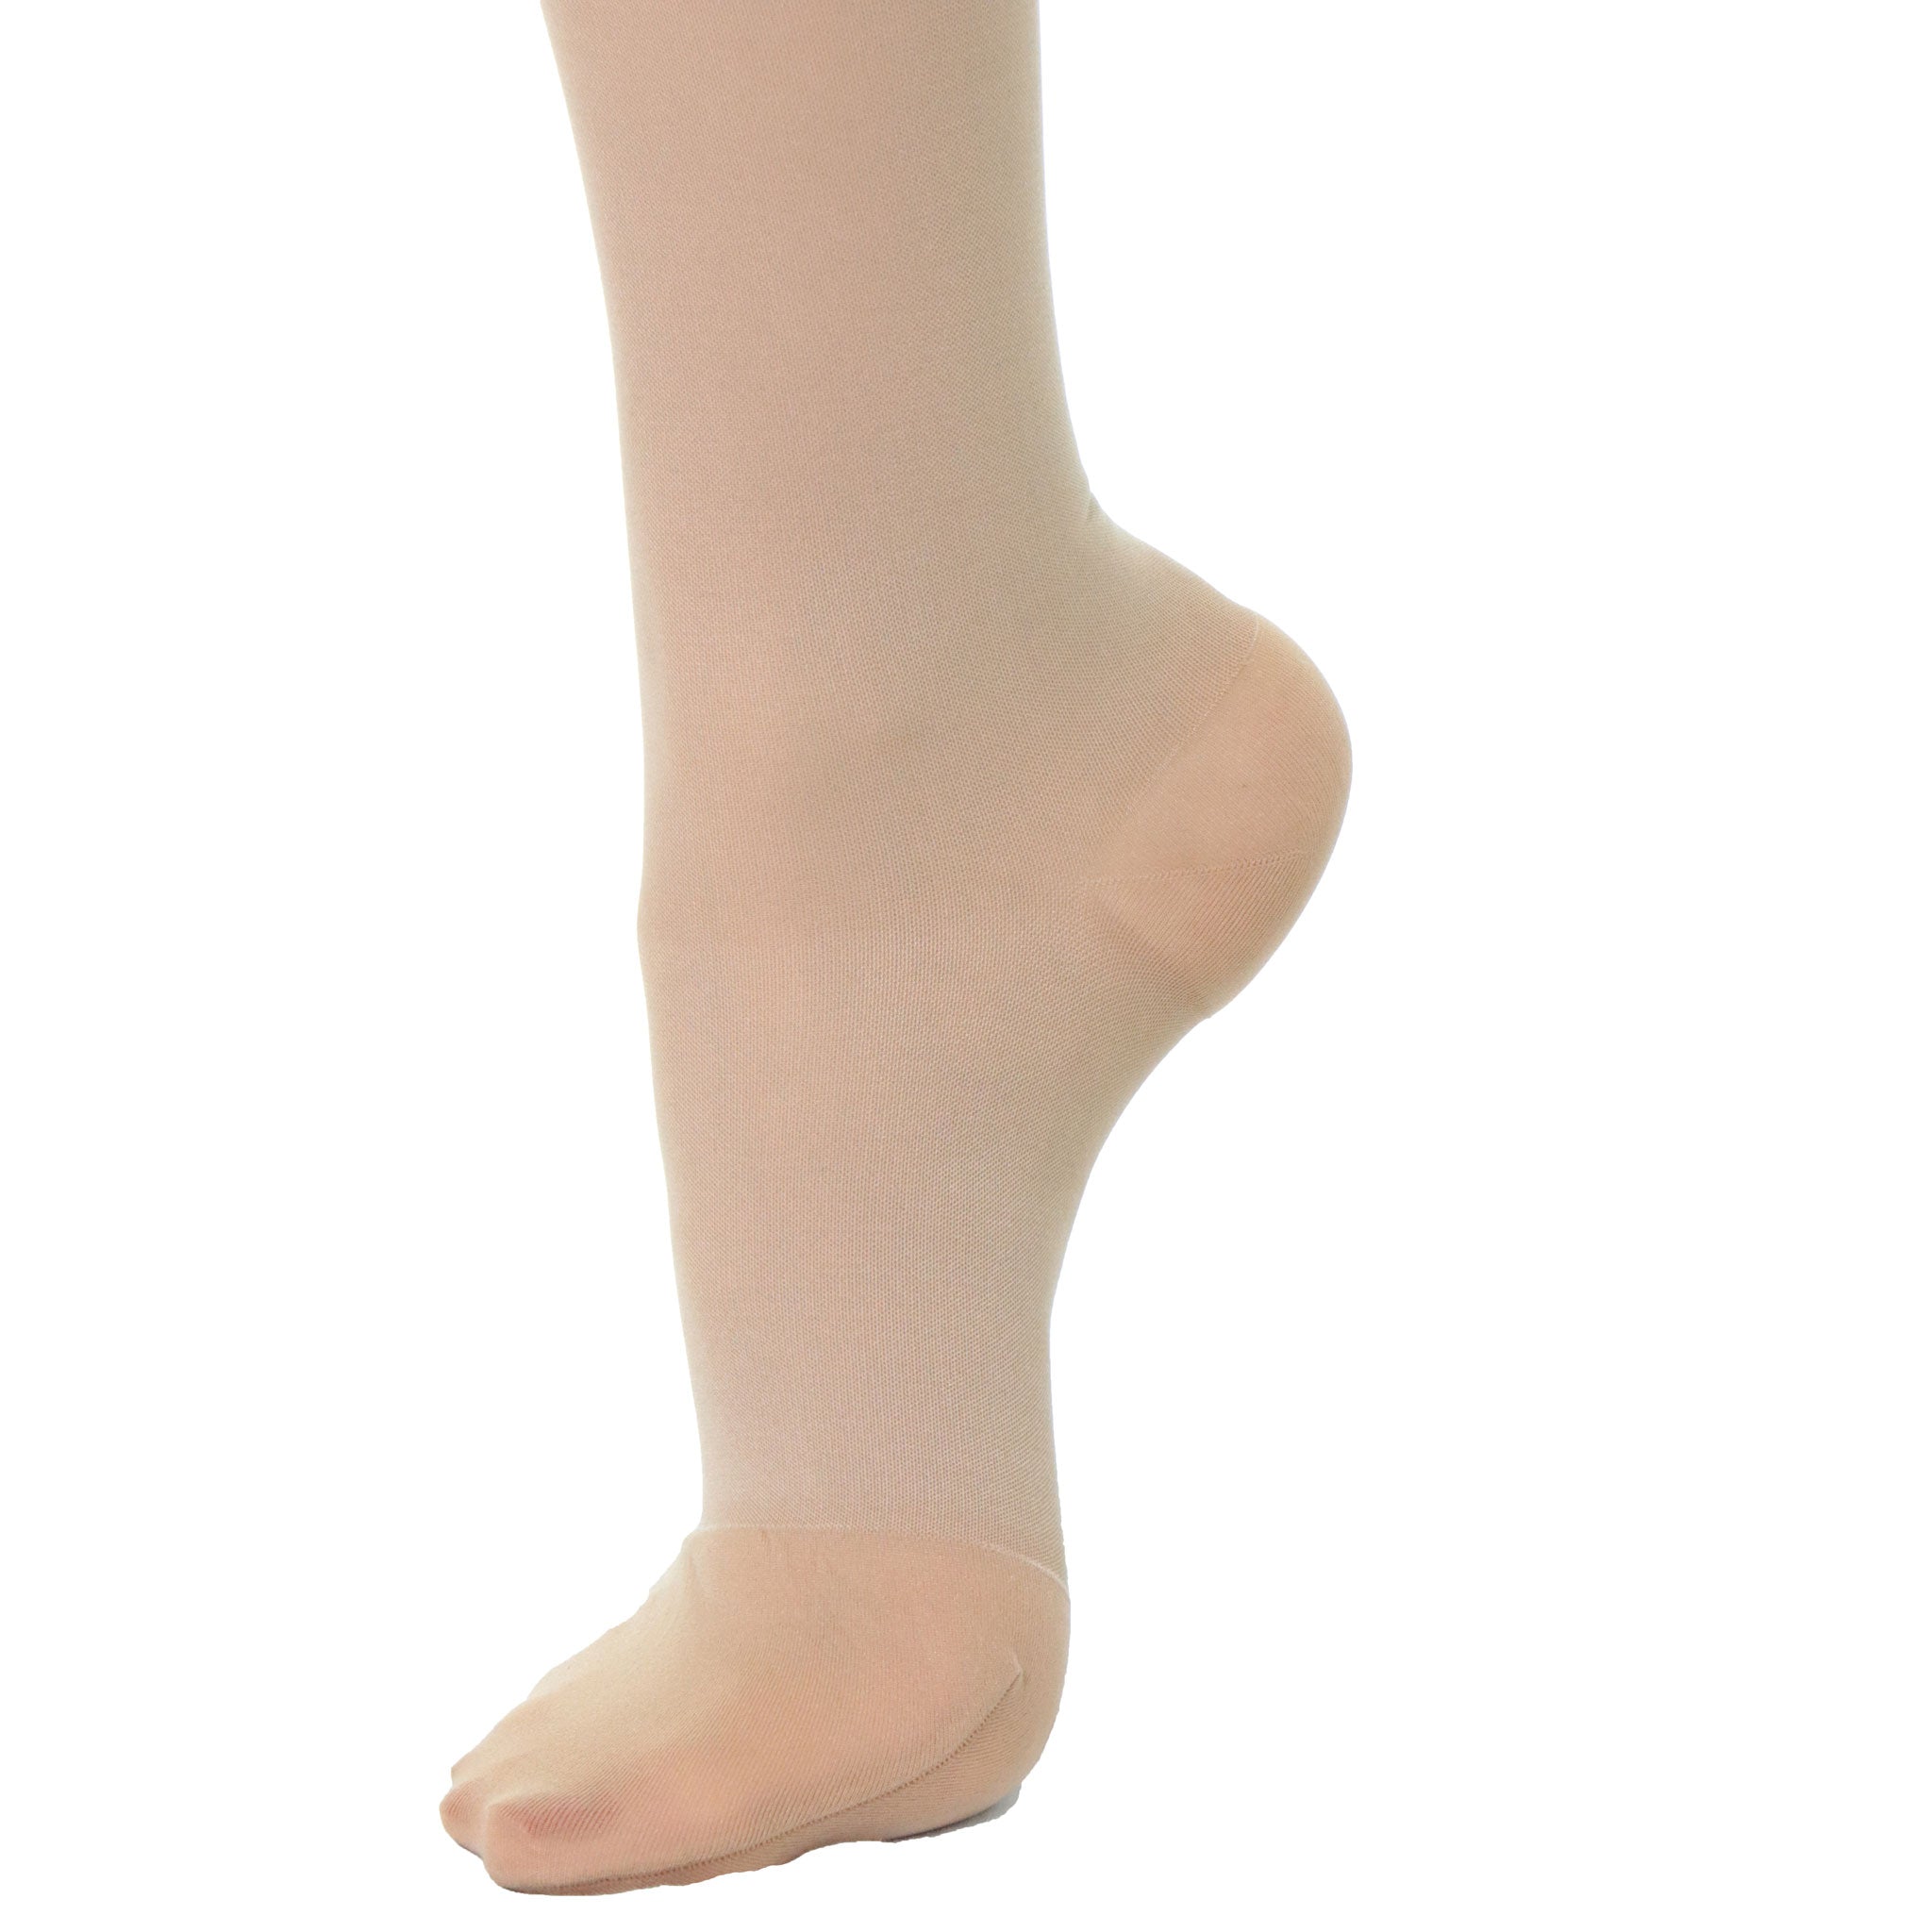 Doctor Brace compression socks for women sheer fabric beige color in 20-30 mmHg toes and heel view